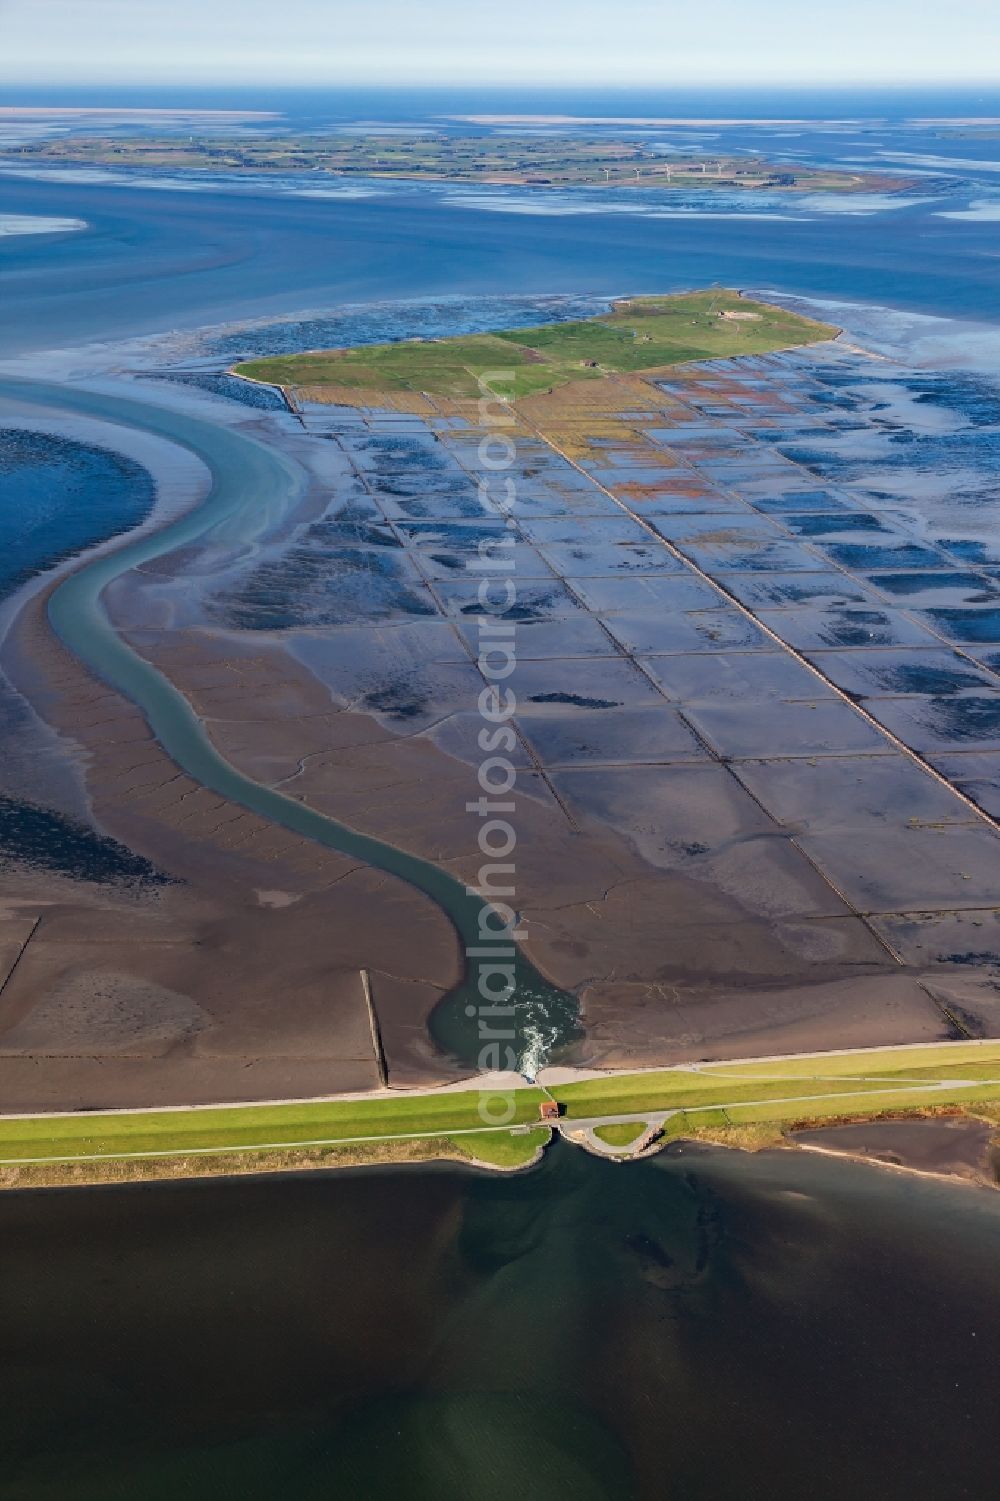 Nordstrandischmoor from the bird's eye view: Green space structures a Hallig Landscape in the North Sea in Nordstrandischmoor in the state Schleswig-Holstein, Germany